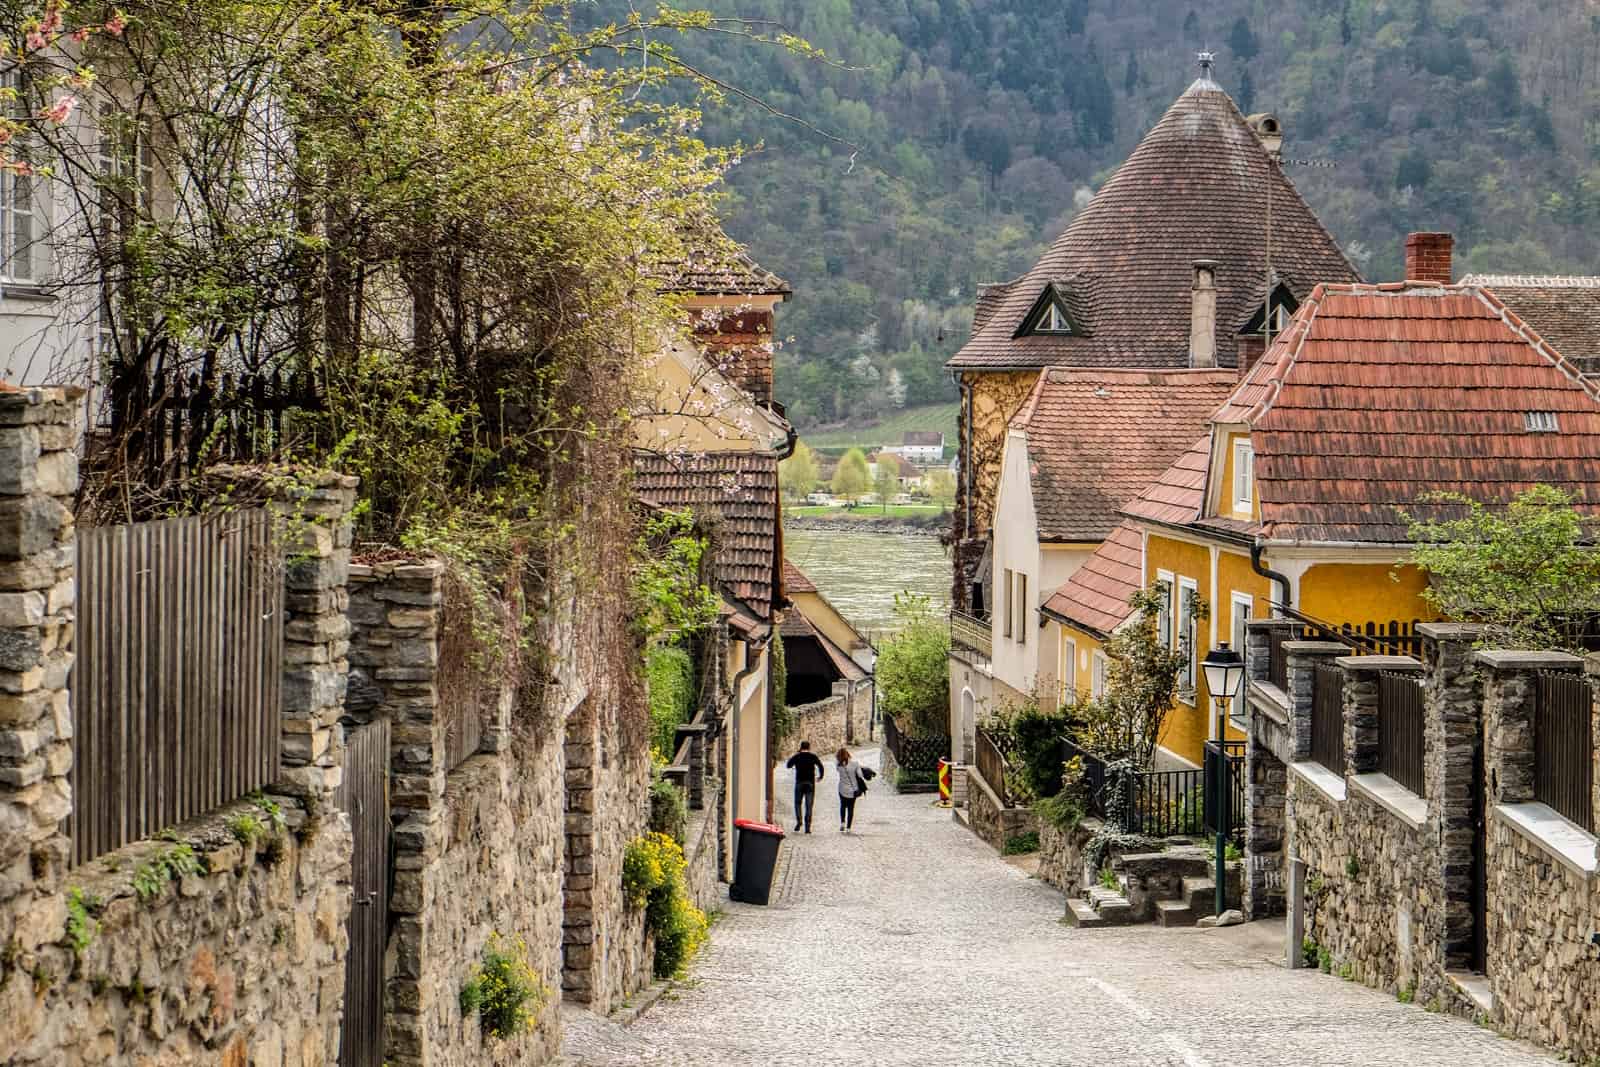 Small, red-roofed villages houses and the stone walls on a street leading down to the Danube River in Dürnstein